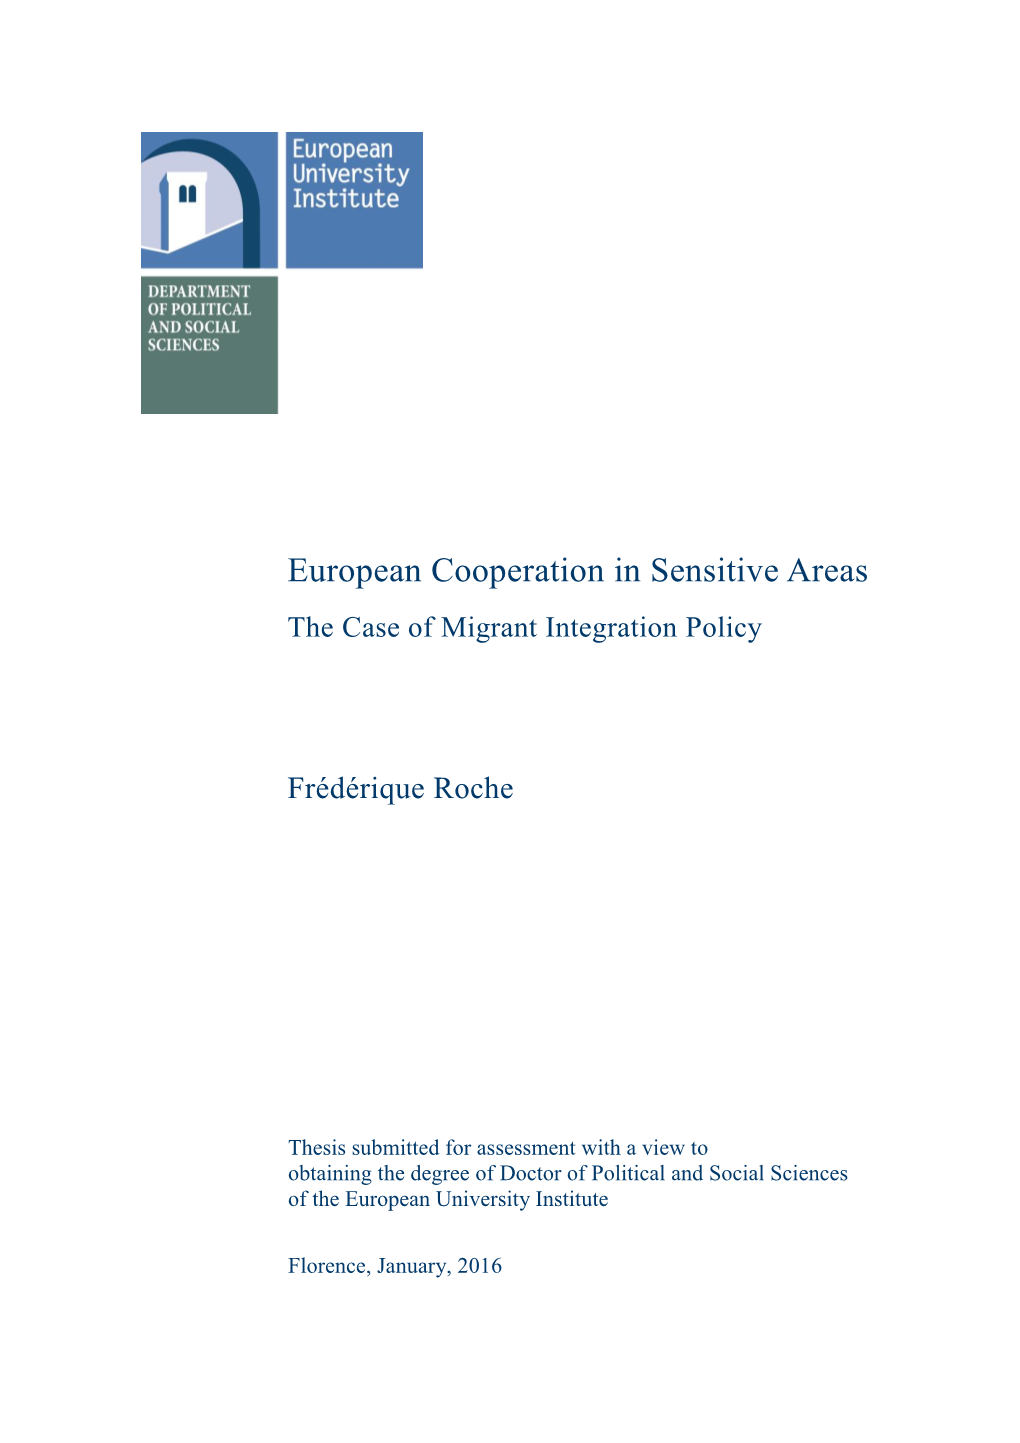 European Cooperation in Sensitive Areas the Case of Migrant Integration Policy